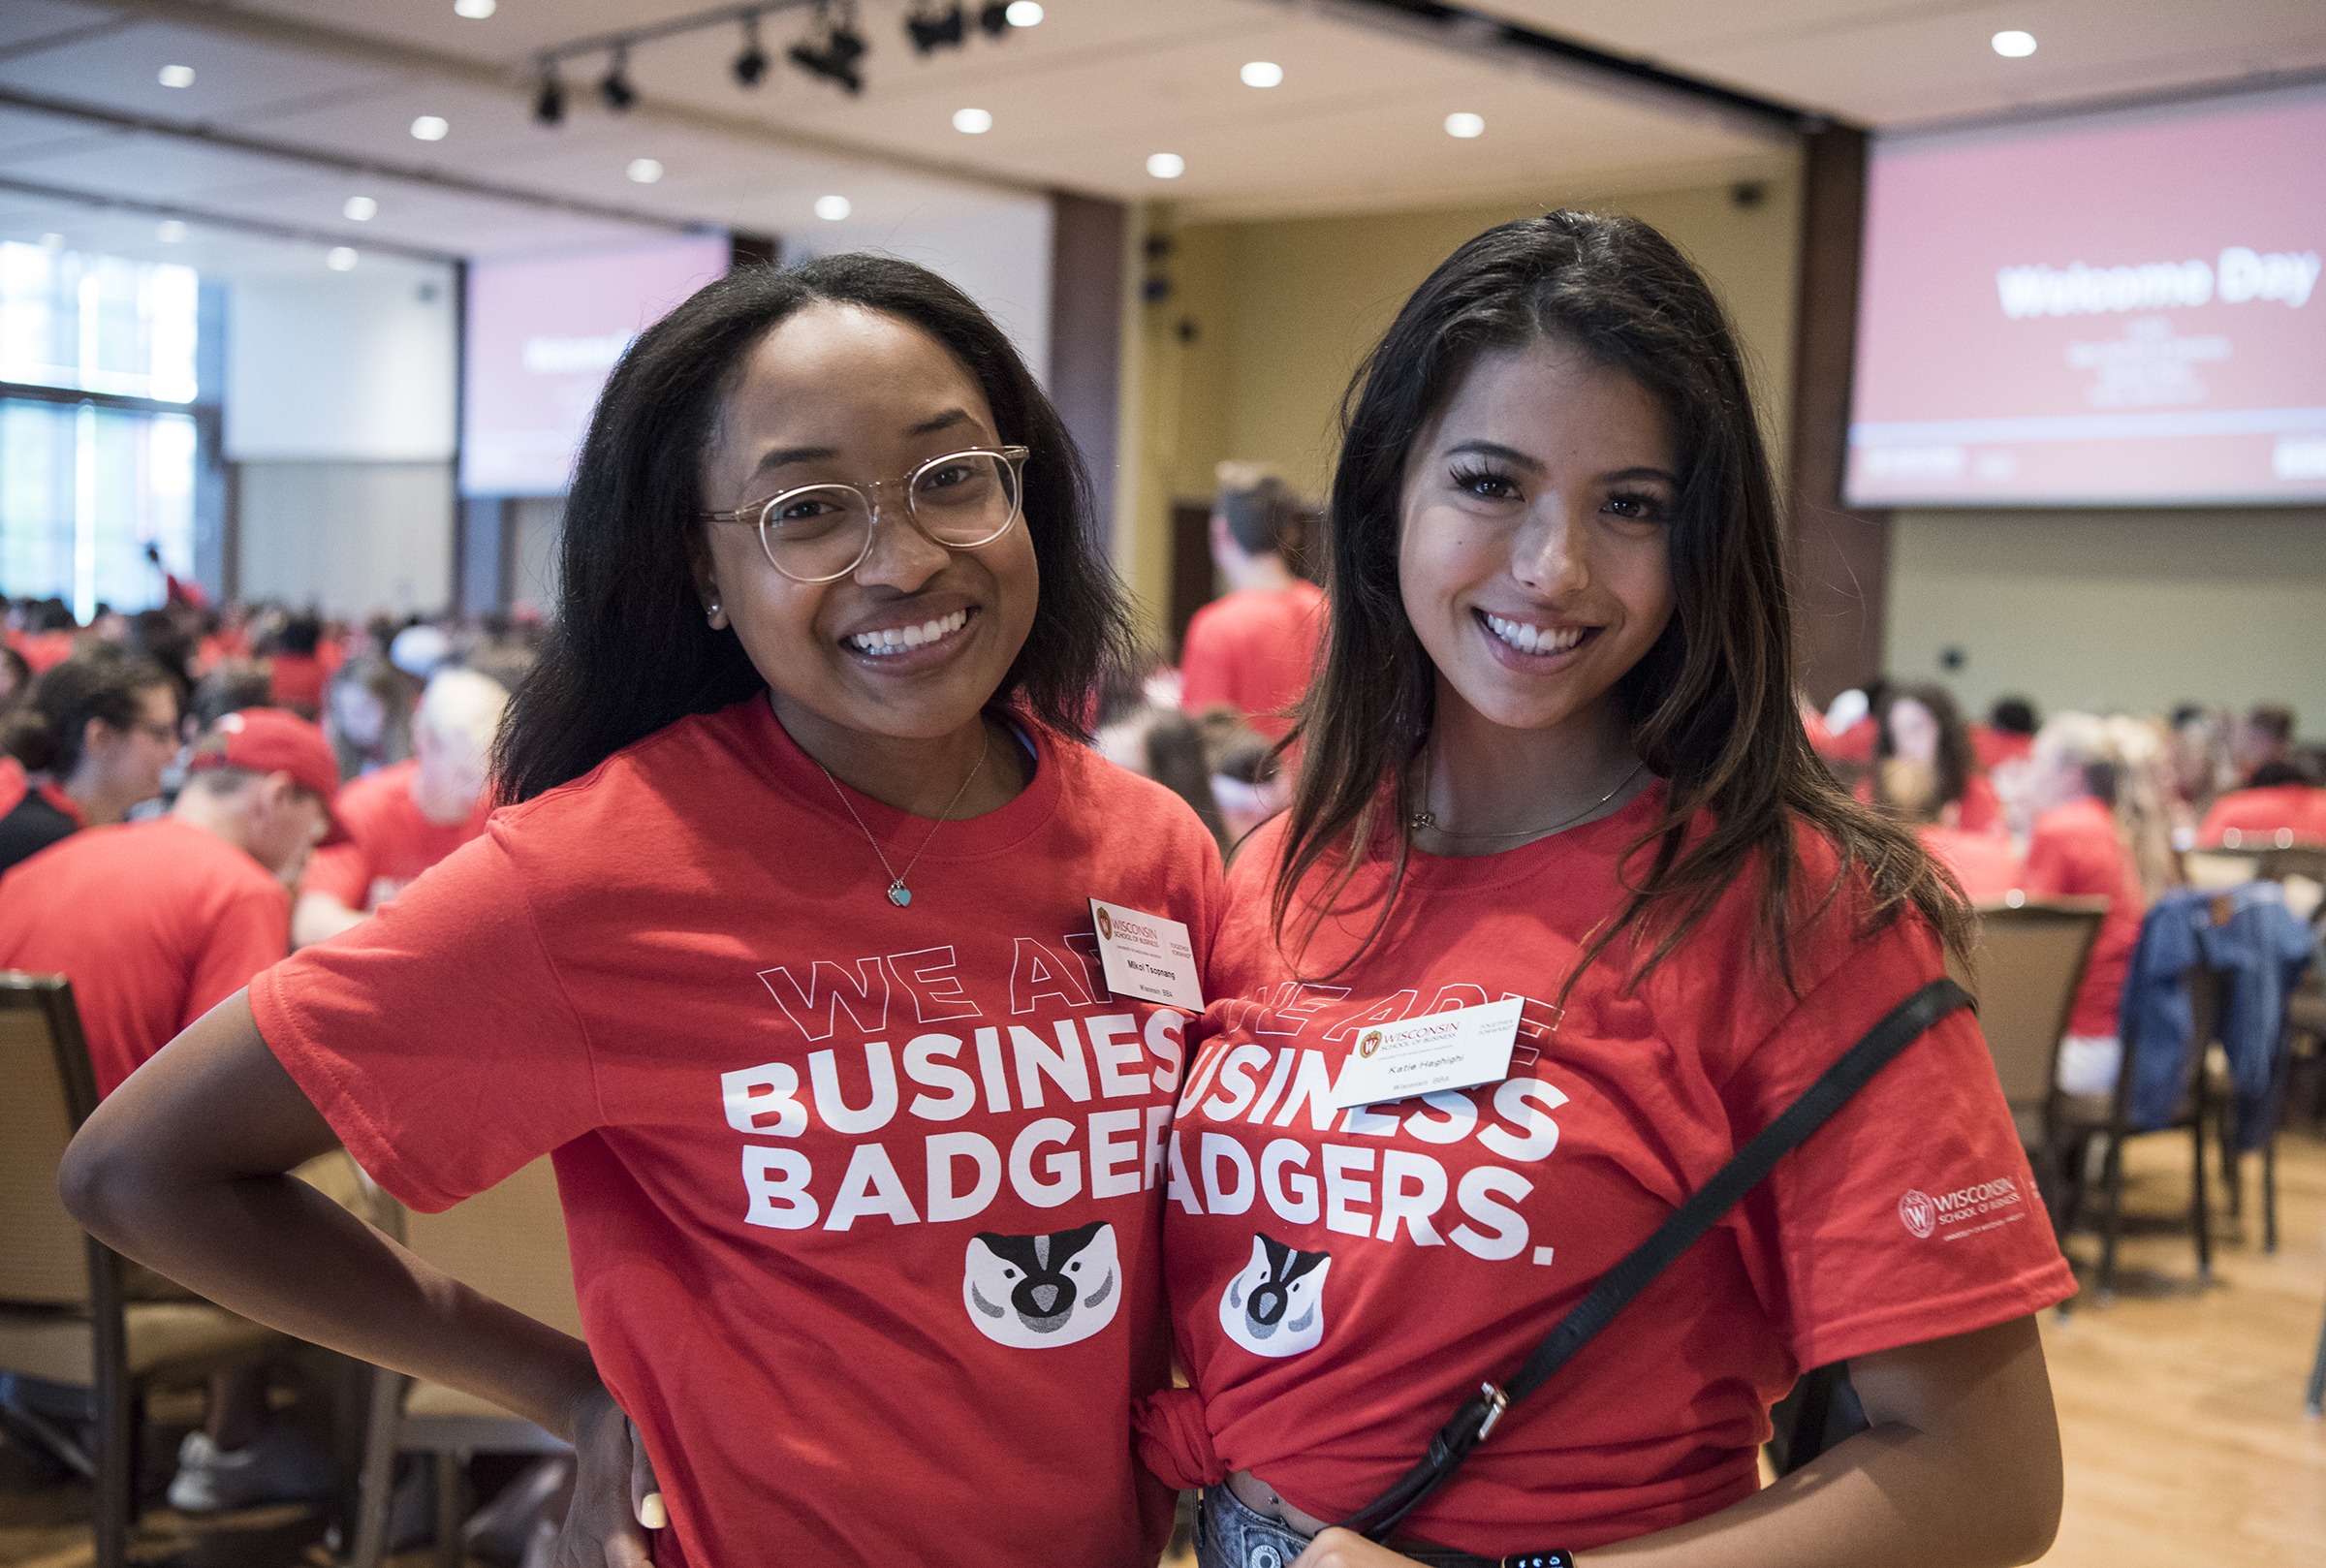 2 students smiling in Business Badger shirts